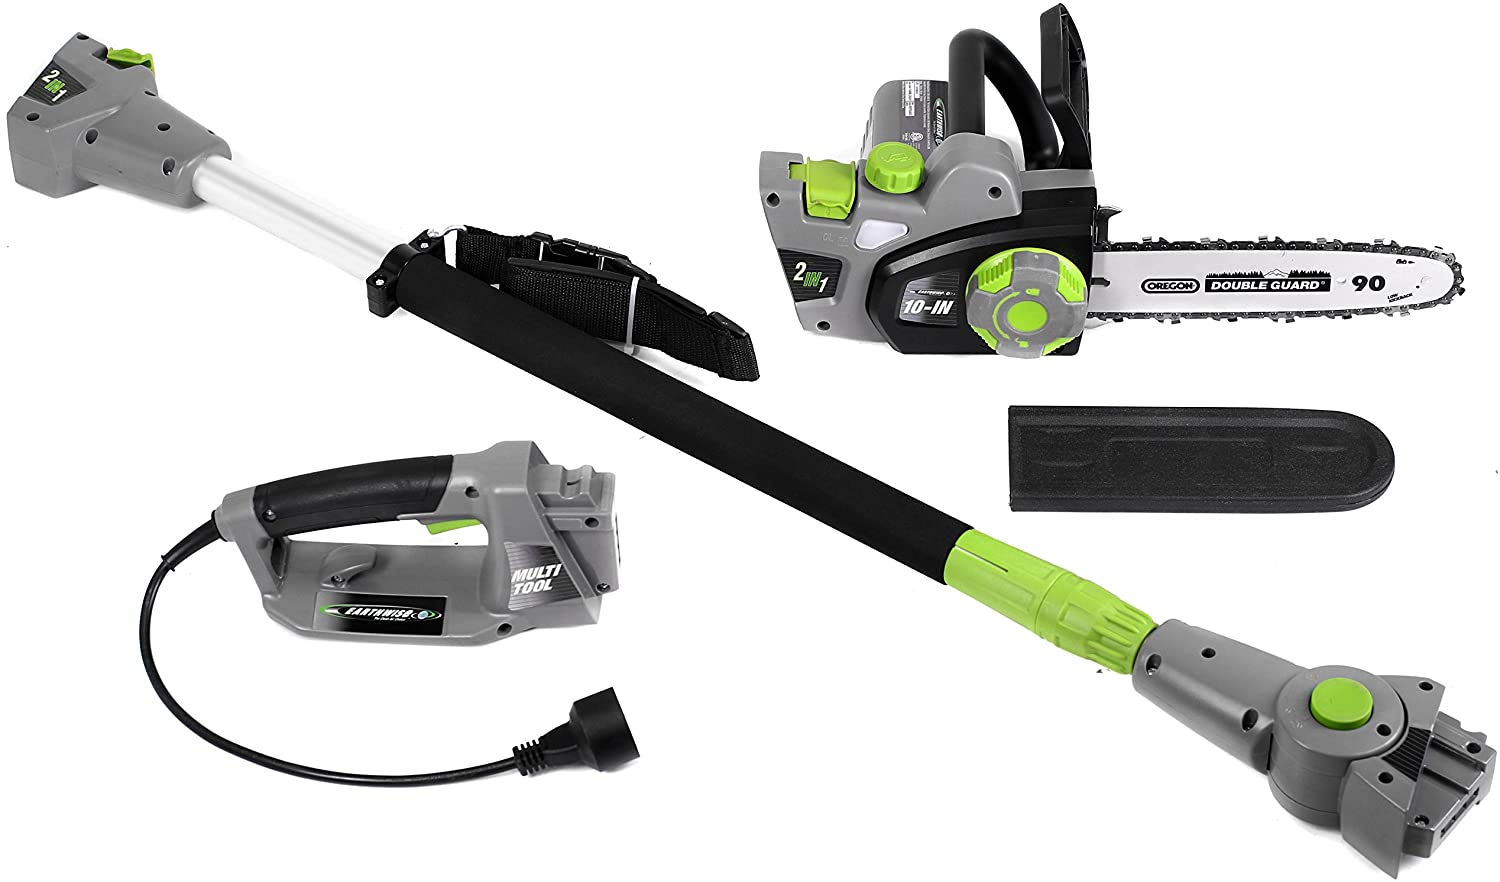 Earthwise CVPS43010 Convertible 2-in-1 Corded Electric Pole Saw